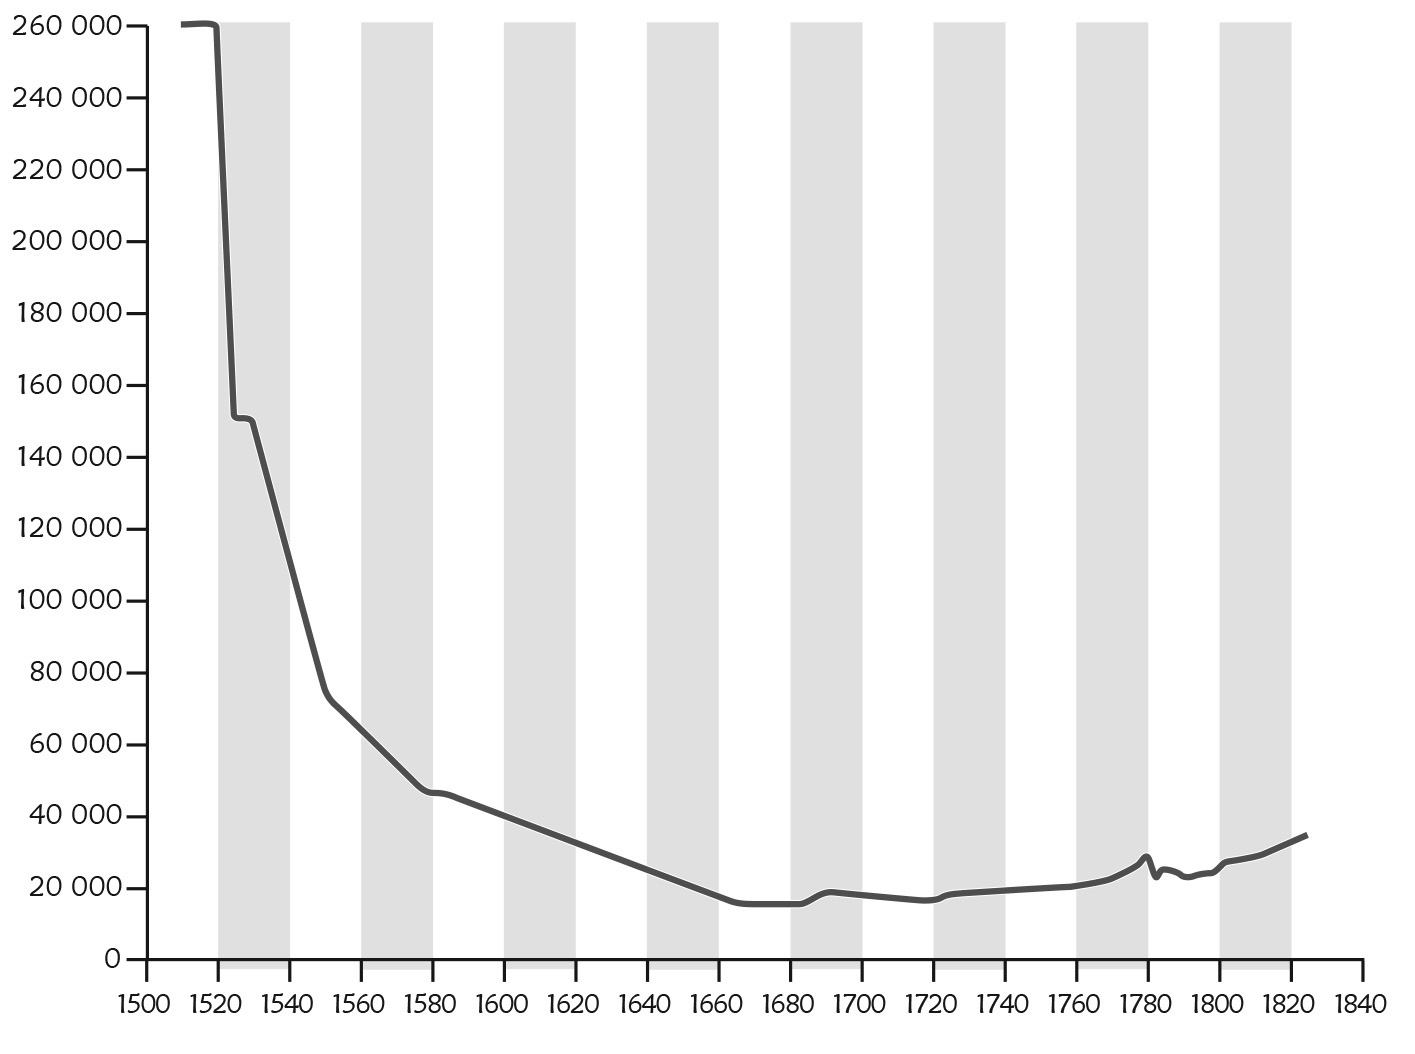 Fig. 2. Collapse and recovery of the Indian population. 1520-1825